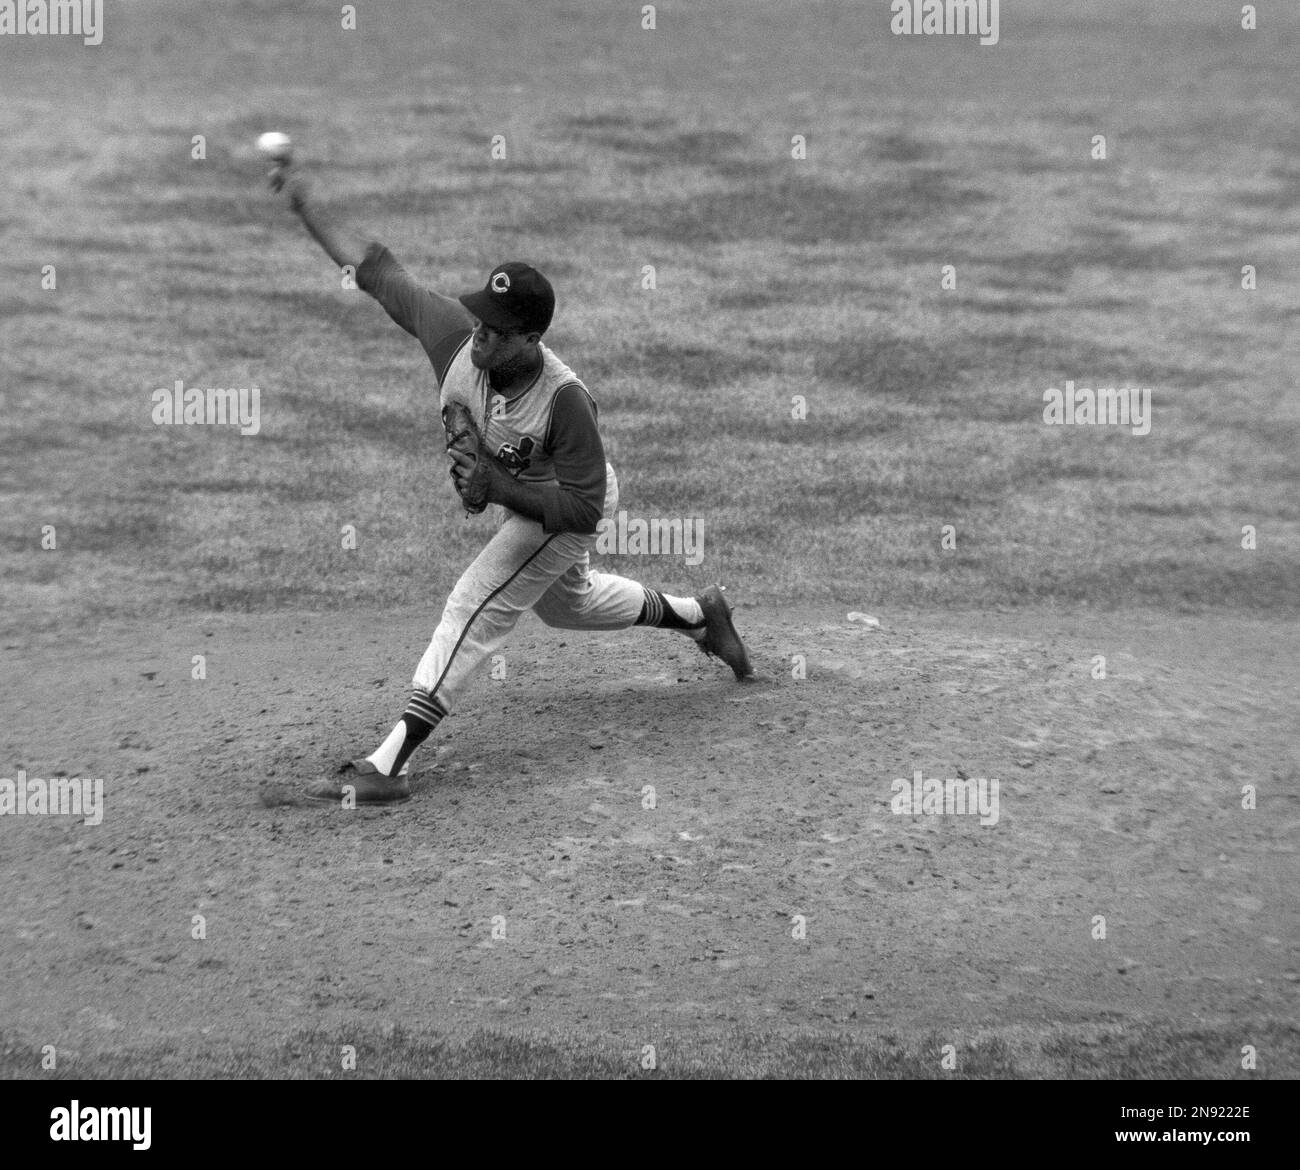 Cleveland Indians pitcher Luis Tiant serves up the ball for the